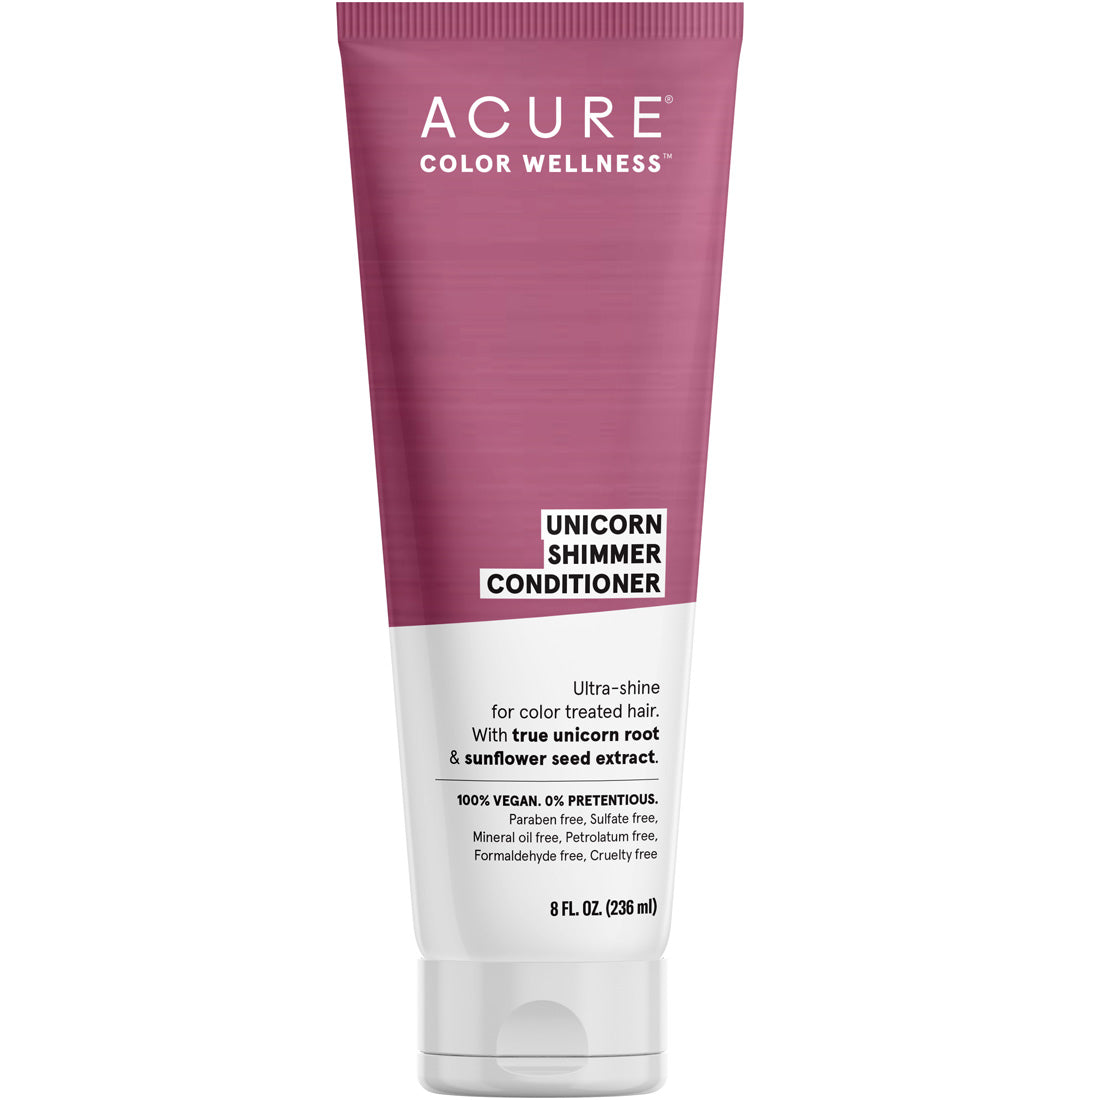 Acure Unicorn Shimmer Conditioner, 236ml